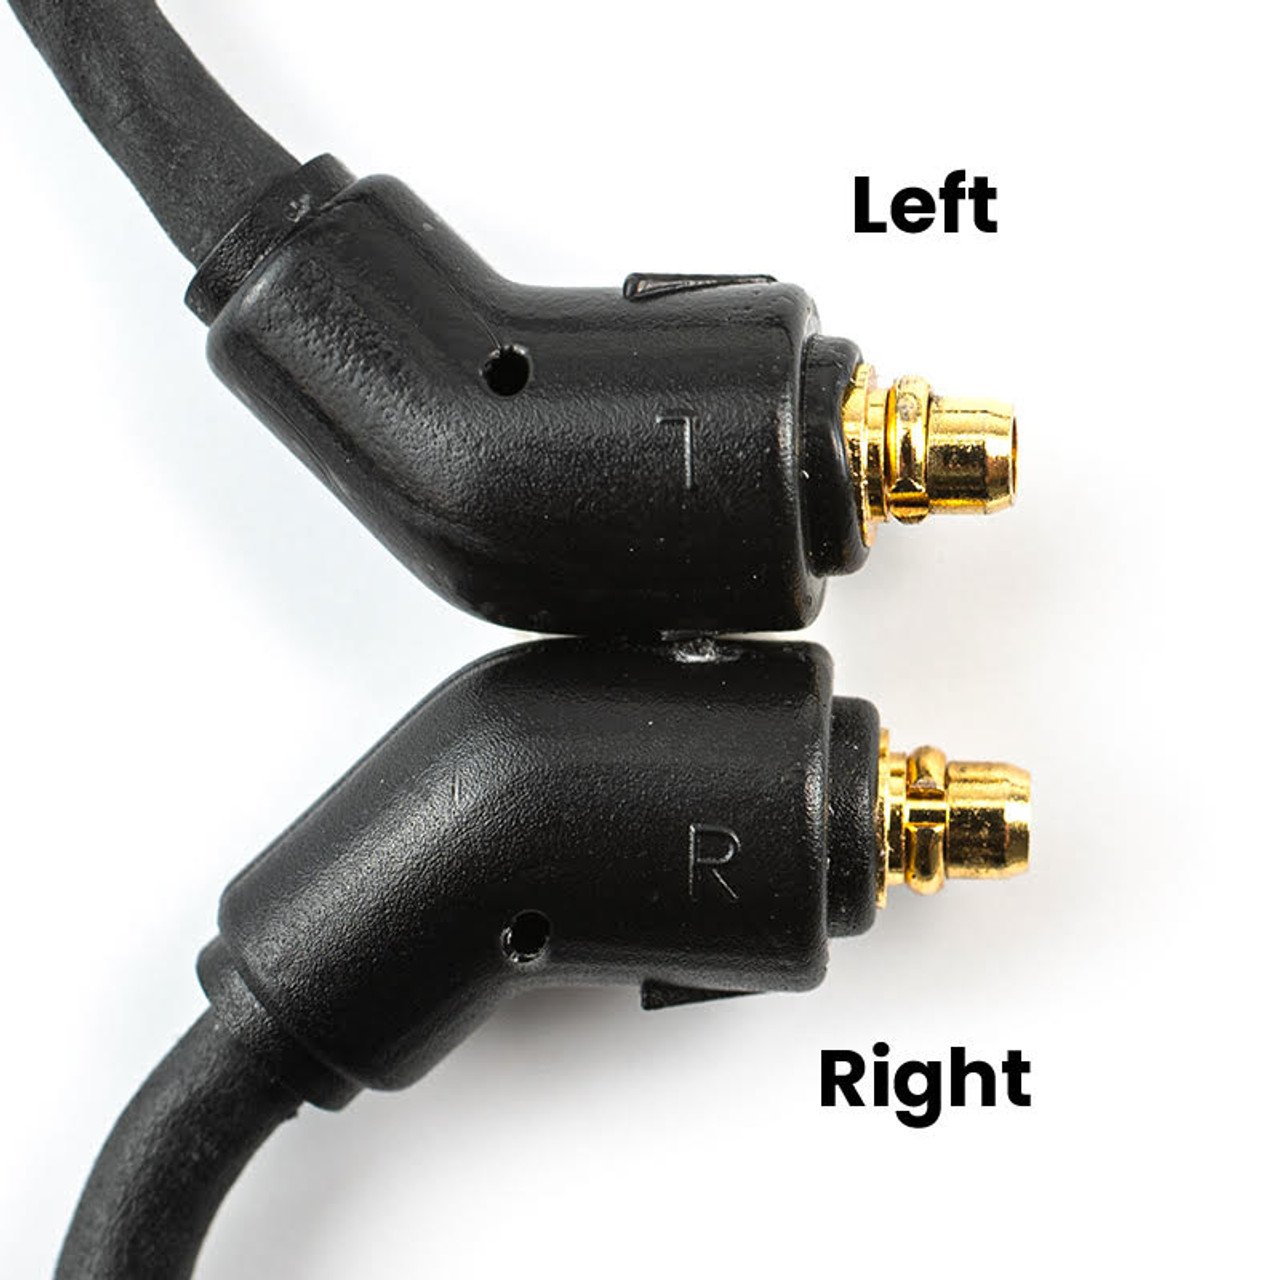 Bronze Dragon IEM Cable left and right channel markings